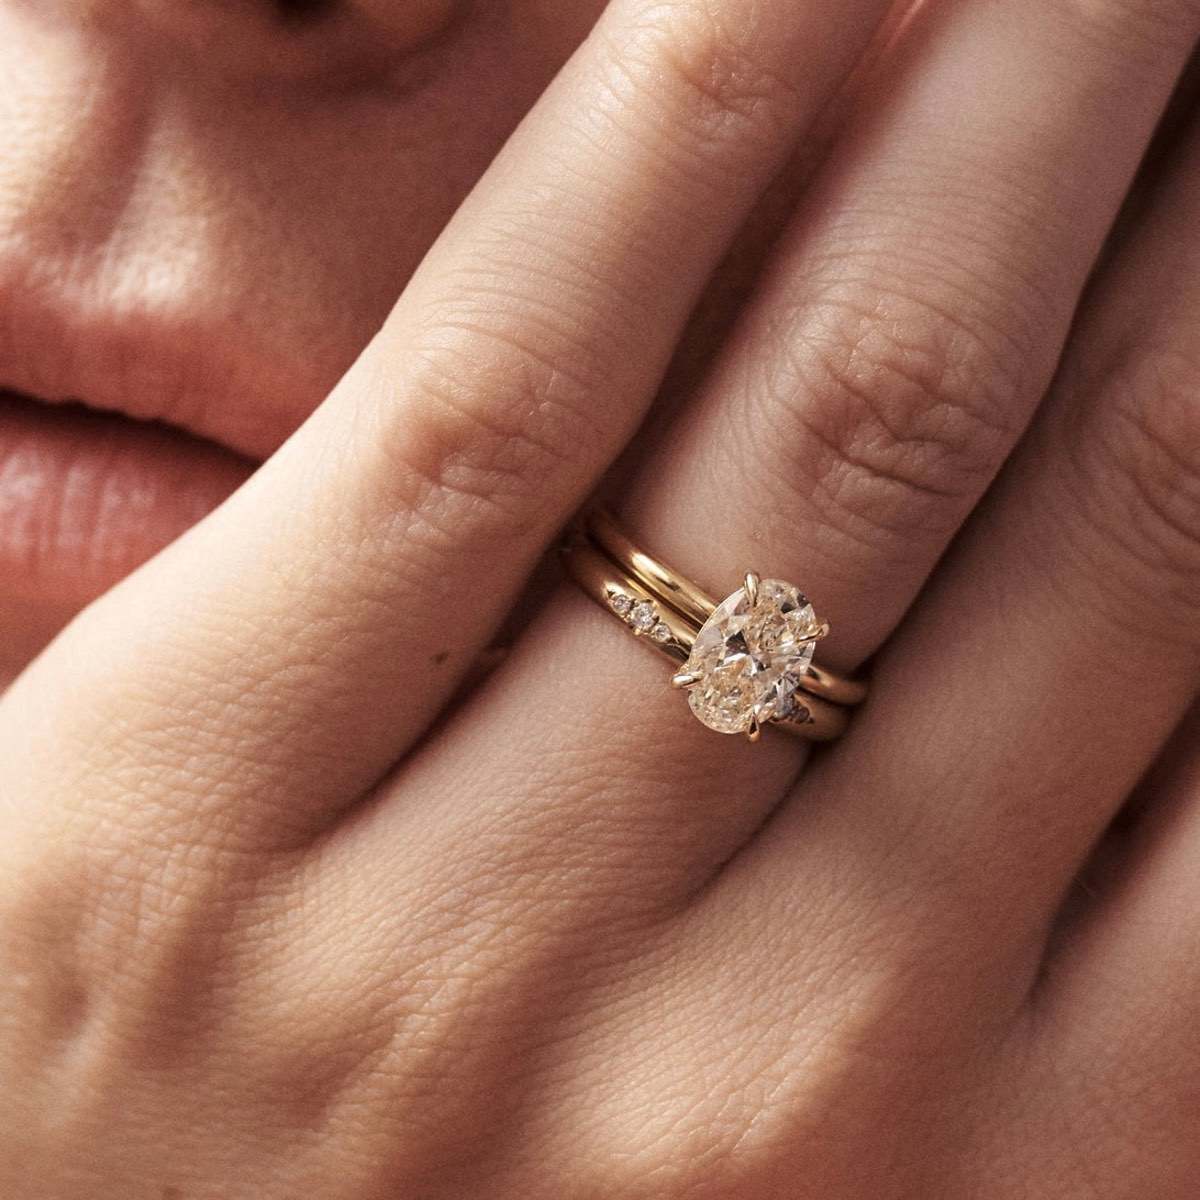 Slow Jewellery: 6 Brands For Ethically Made Engagement And Wedding Rings In  Australia - Britt's List